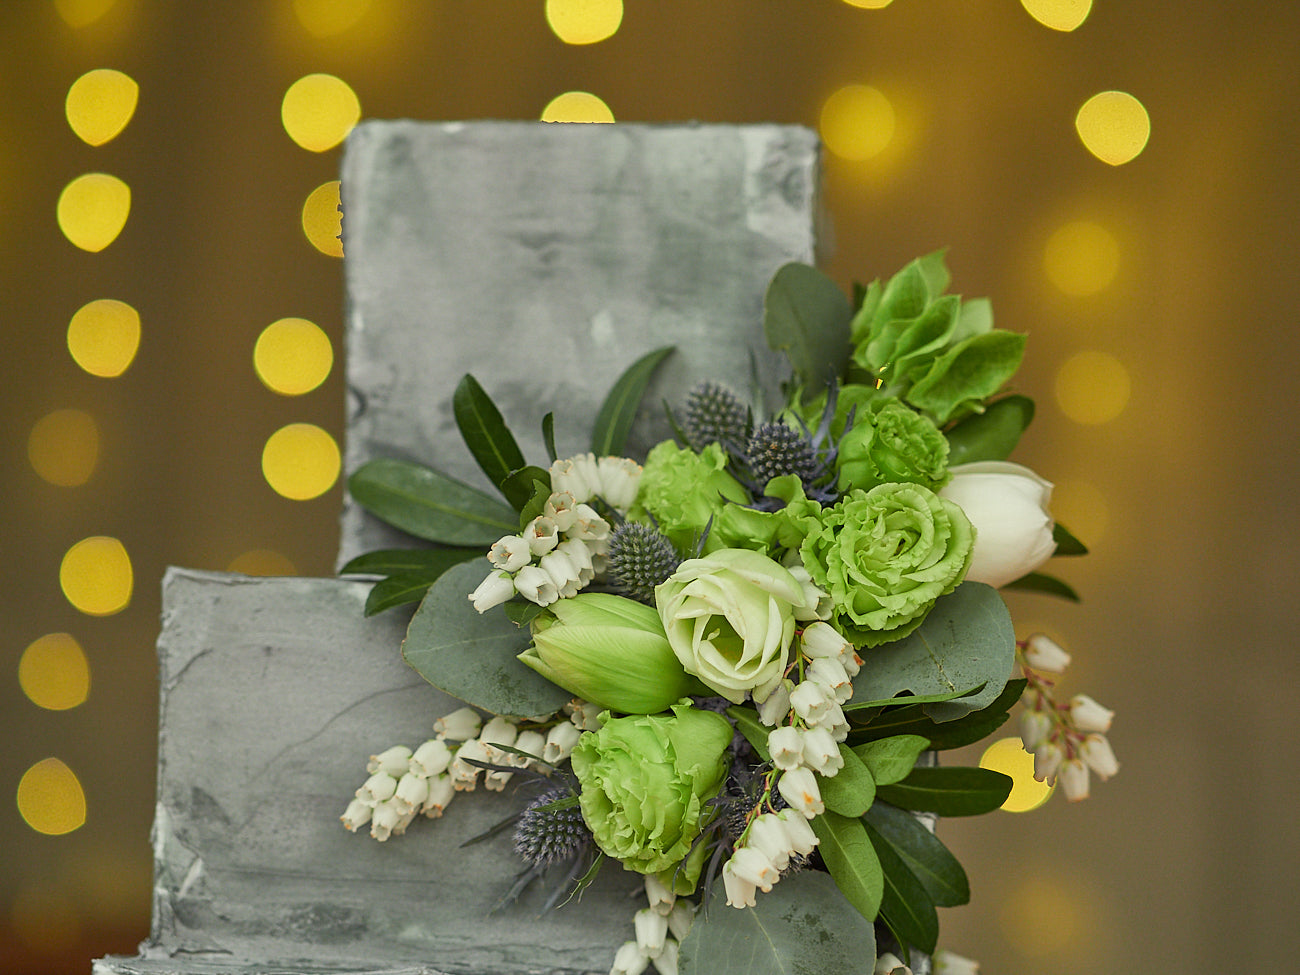 3 Tier Square Concrete Cake with Green Flowers